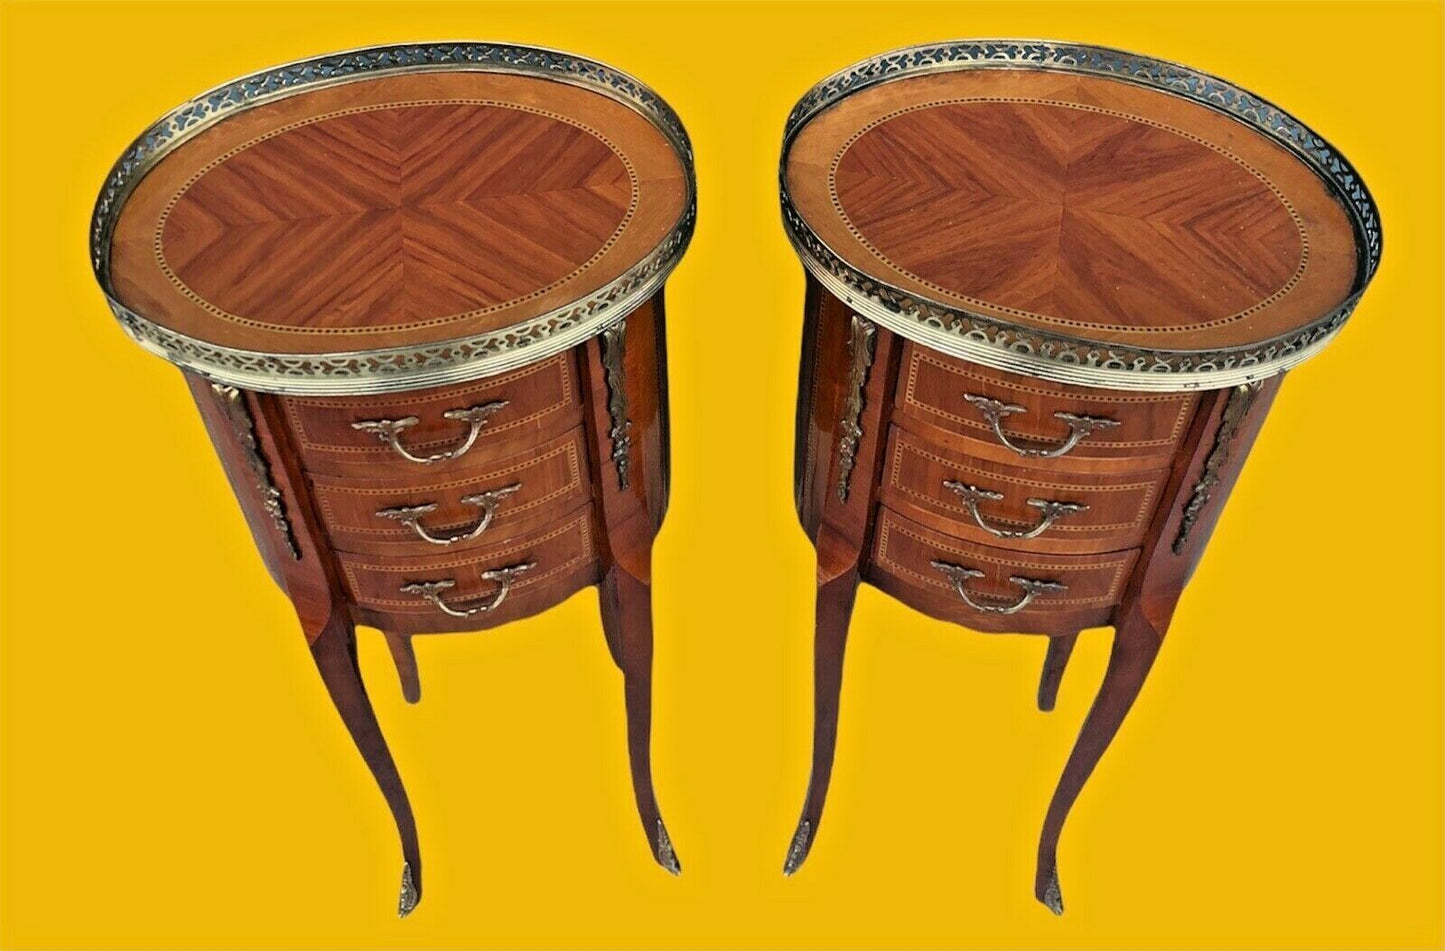 Stunning Pair Of Small Vintage French Lamp Tables / Bedside Tables ( SOLD )